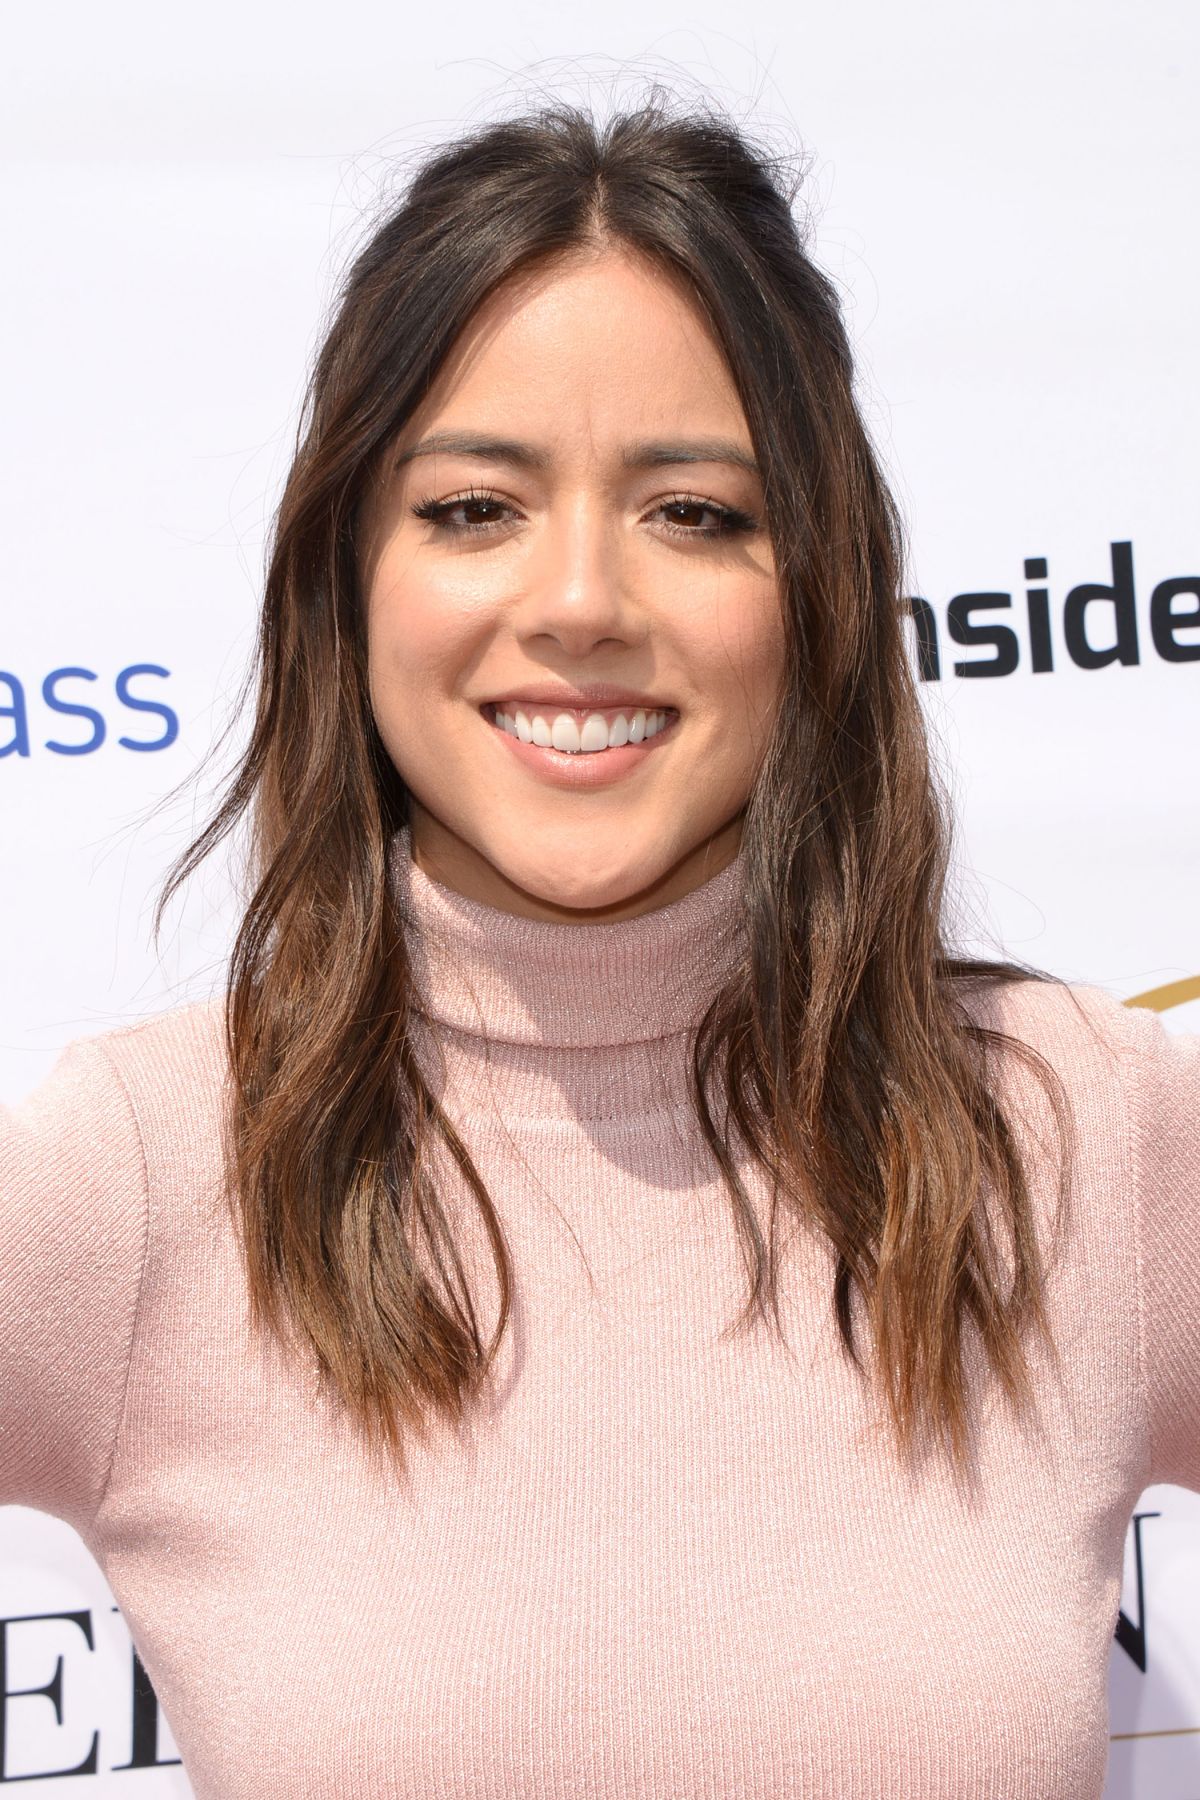 Chloe Bennet in Haney at 2018 GQ Men of the Year Party in 